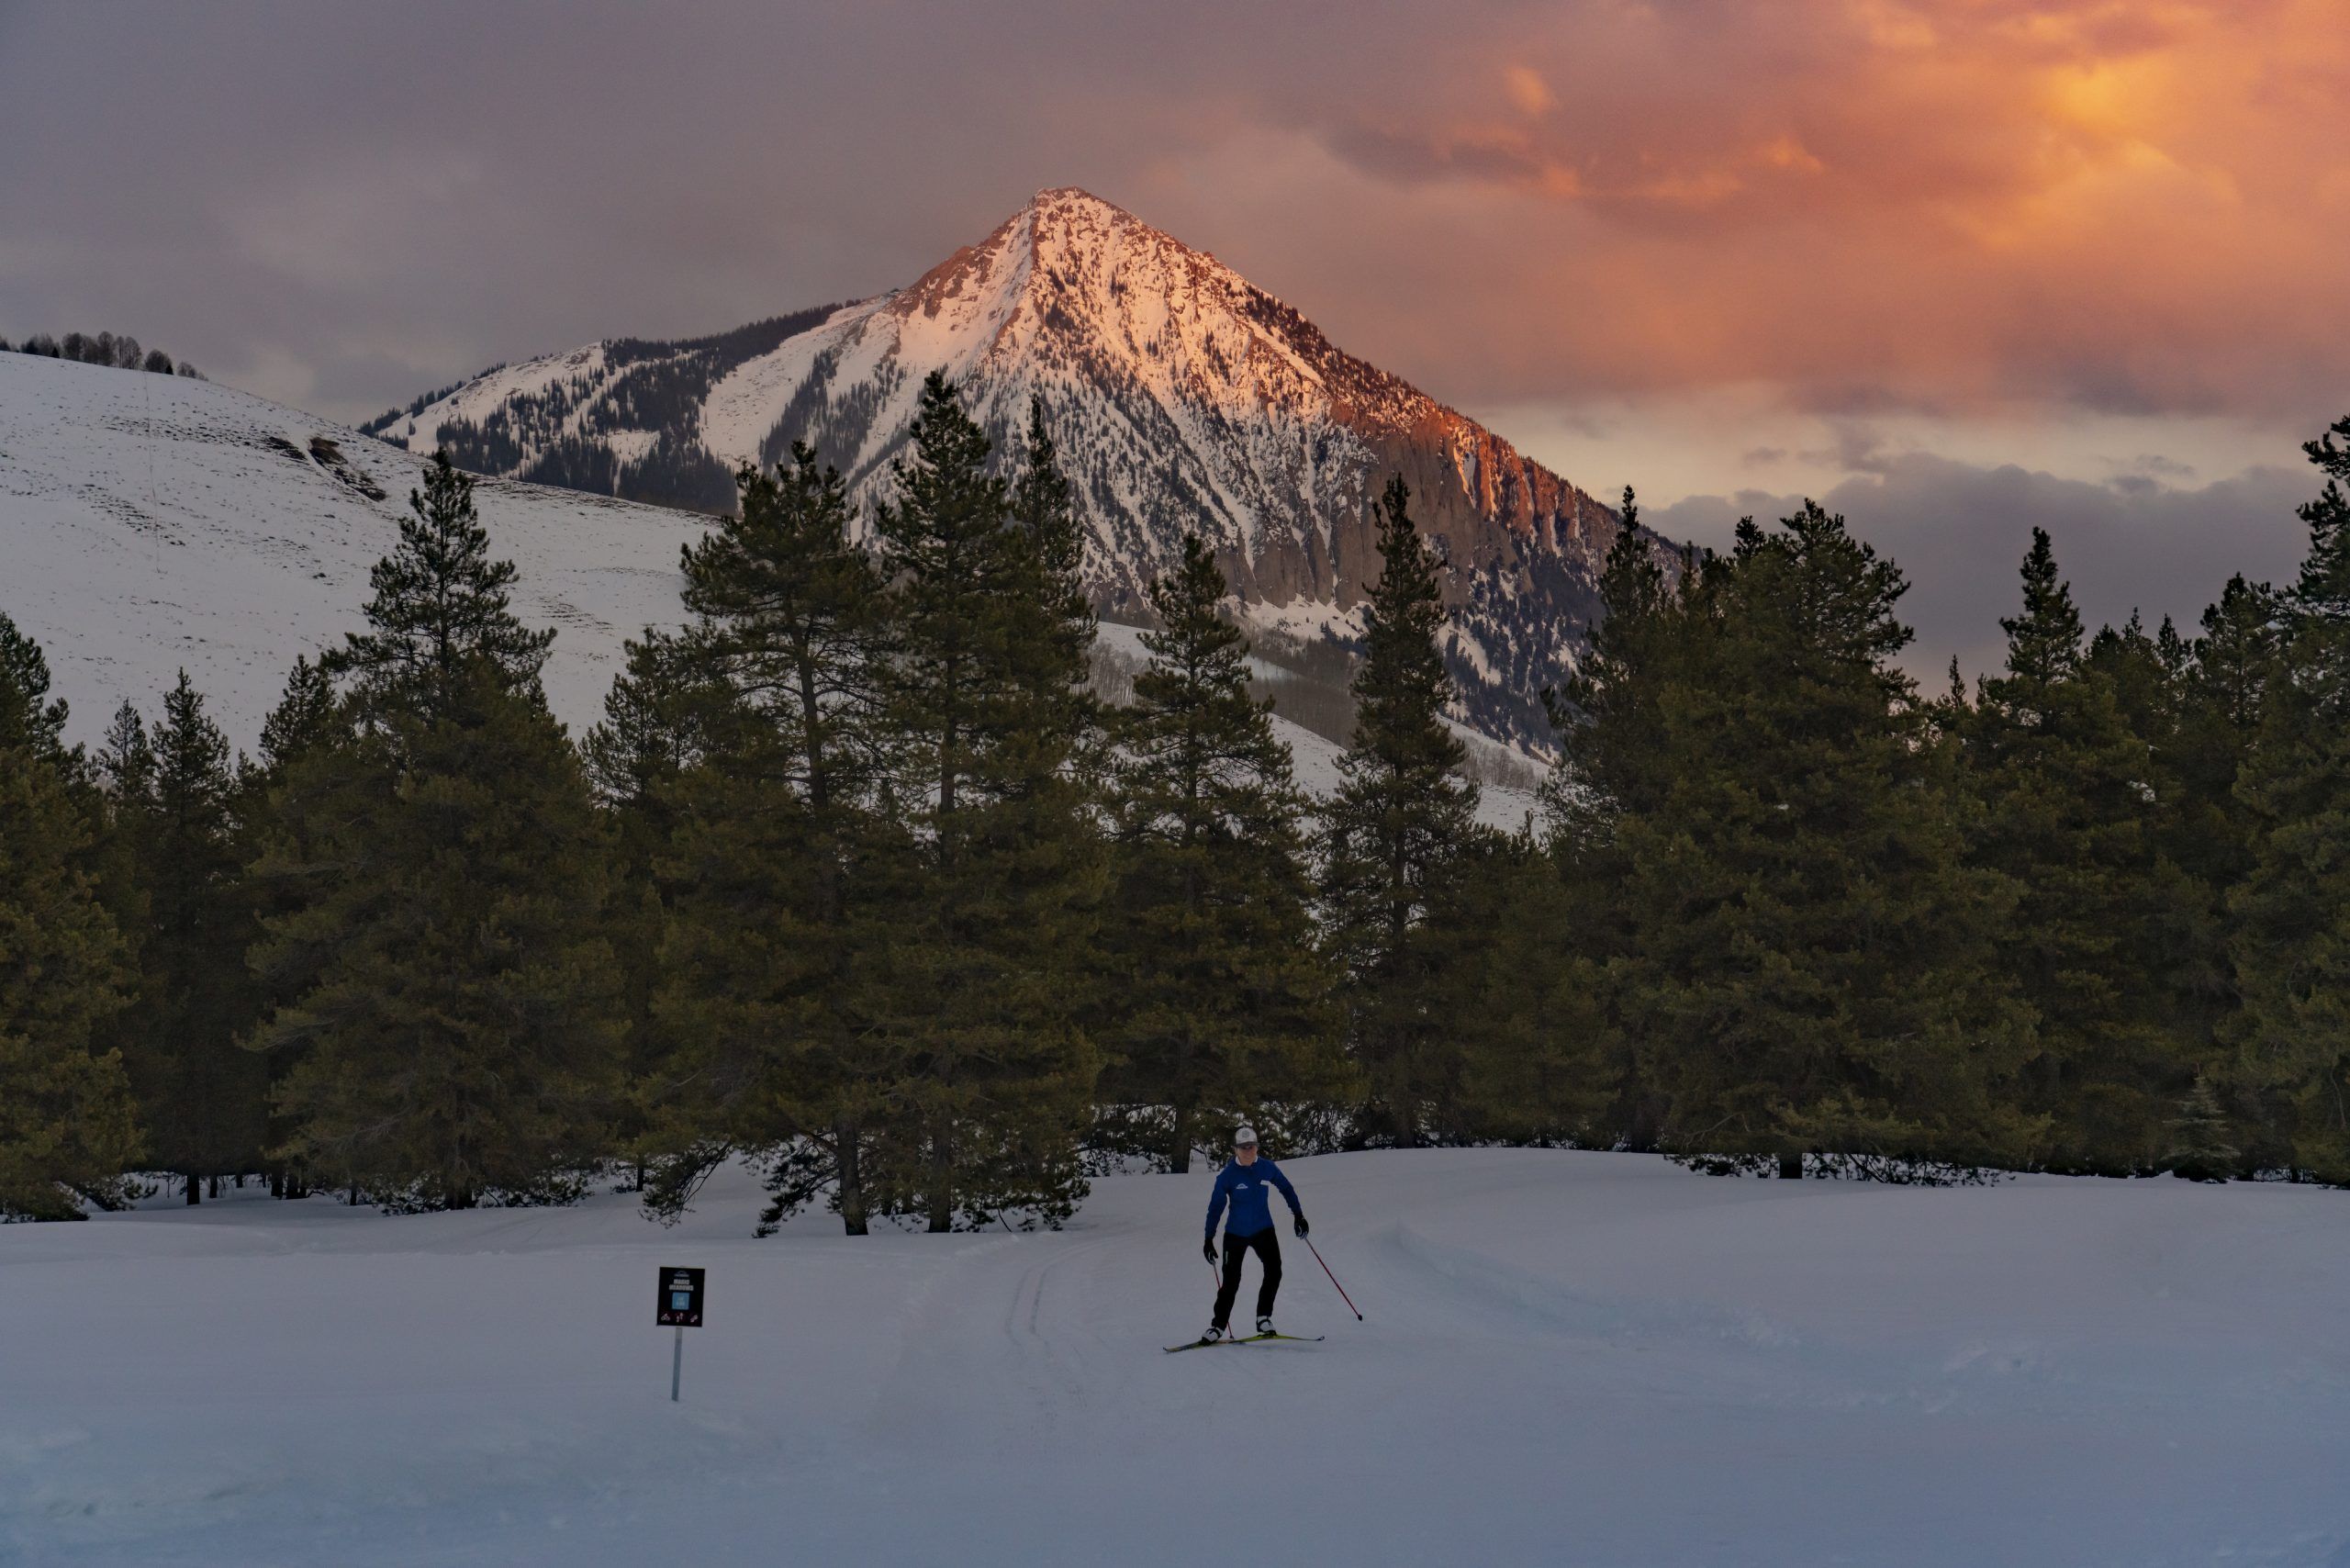 A person cross-country skis on a snowy path under a sunset and a mountain peak